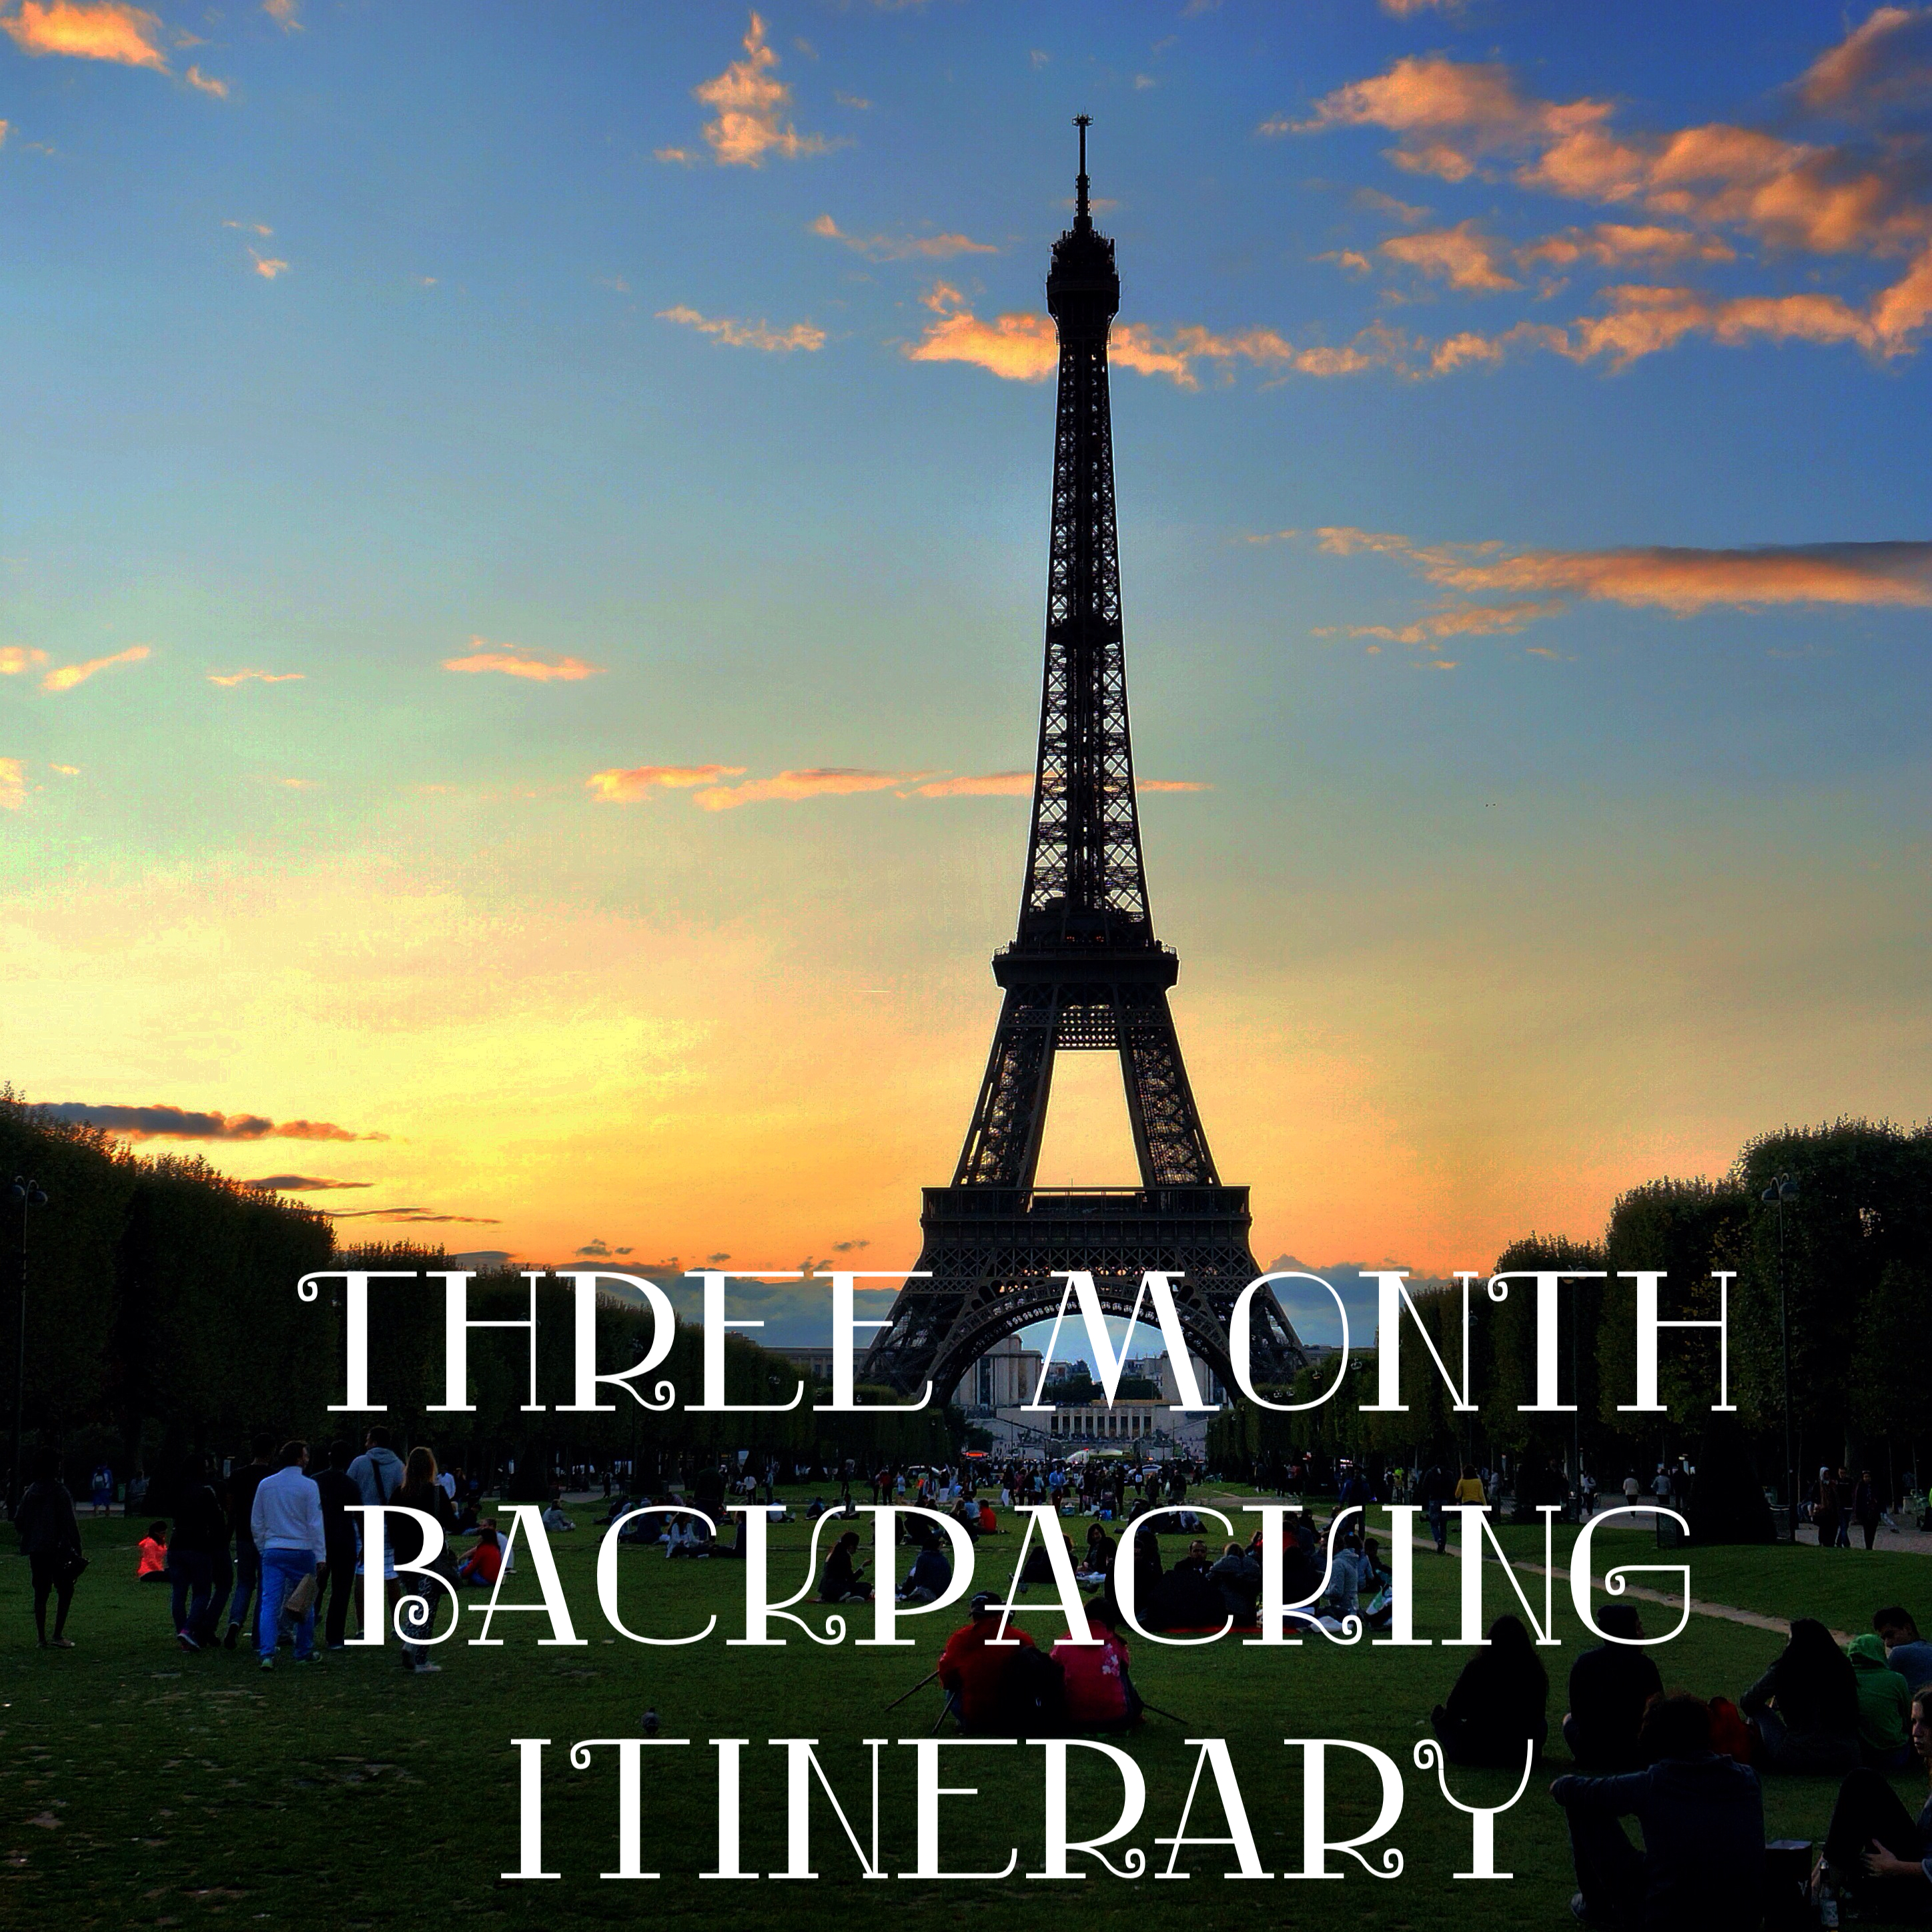 So you want to backpack through Europe in a summer? Check out my exact 3 month backpacking itinerary.